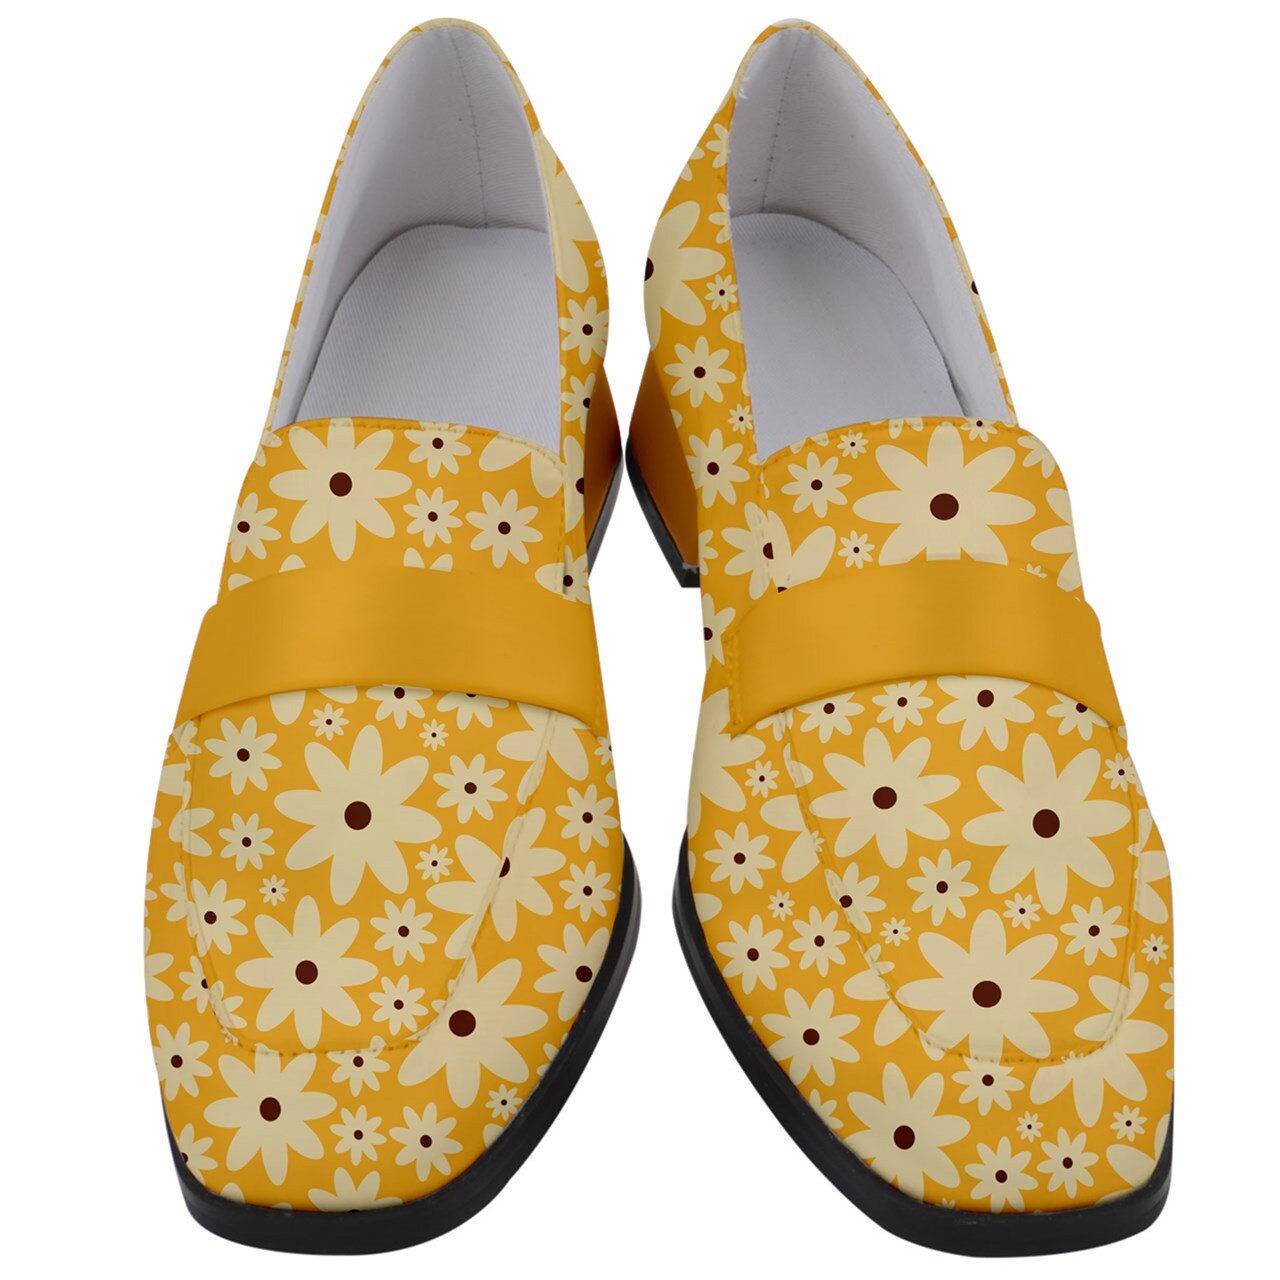 Yellow Loafers, Loafers Women, Yellow Shoes Women, Loafers Vintage Style, Pin up Loafers, Daisy Shoes, Chunky Heels Women, retro shoes